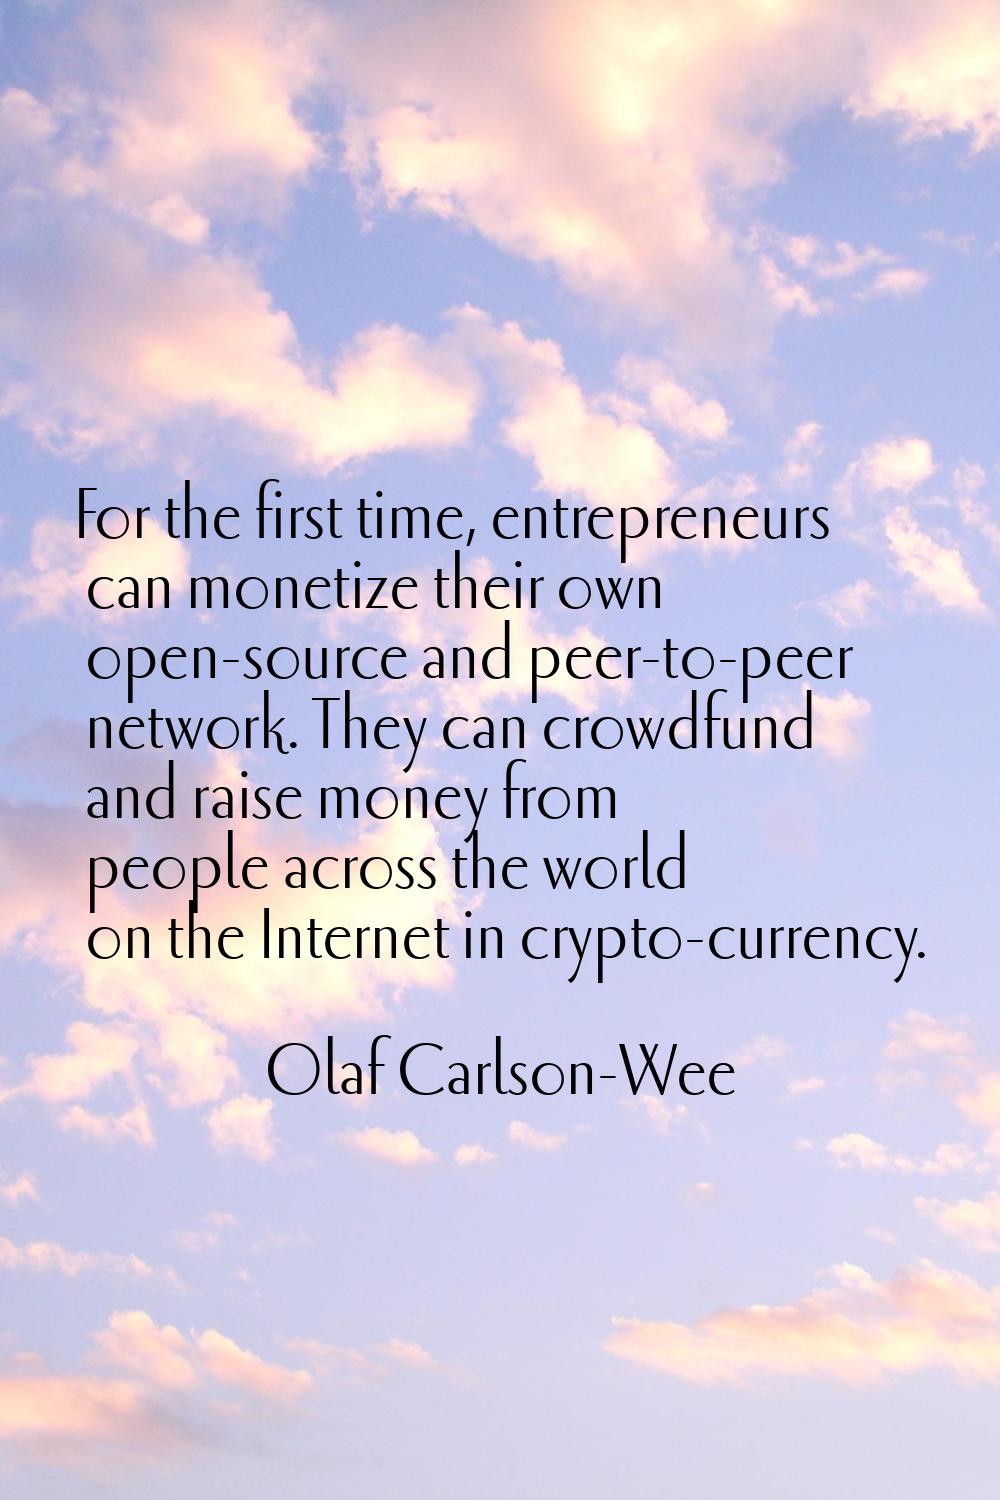 For the first time, entrepreneurs can monetize their own open-source and peer-to-peer network. They